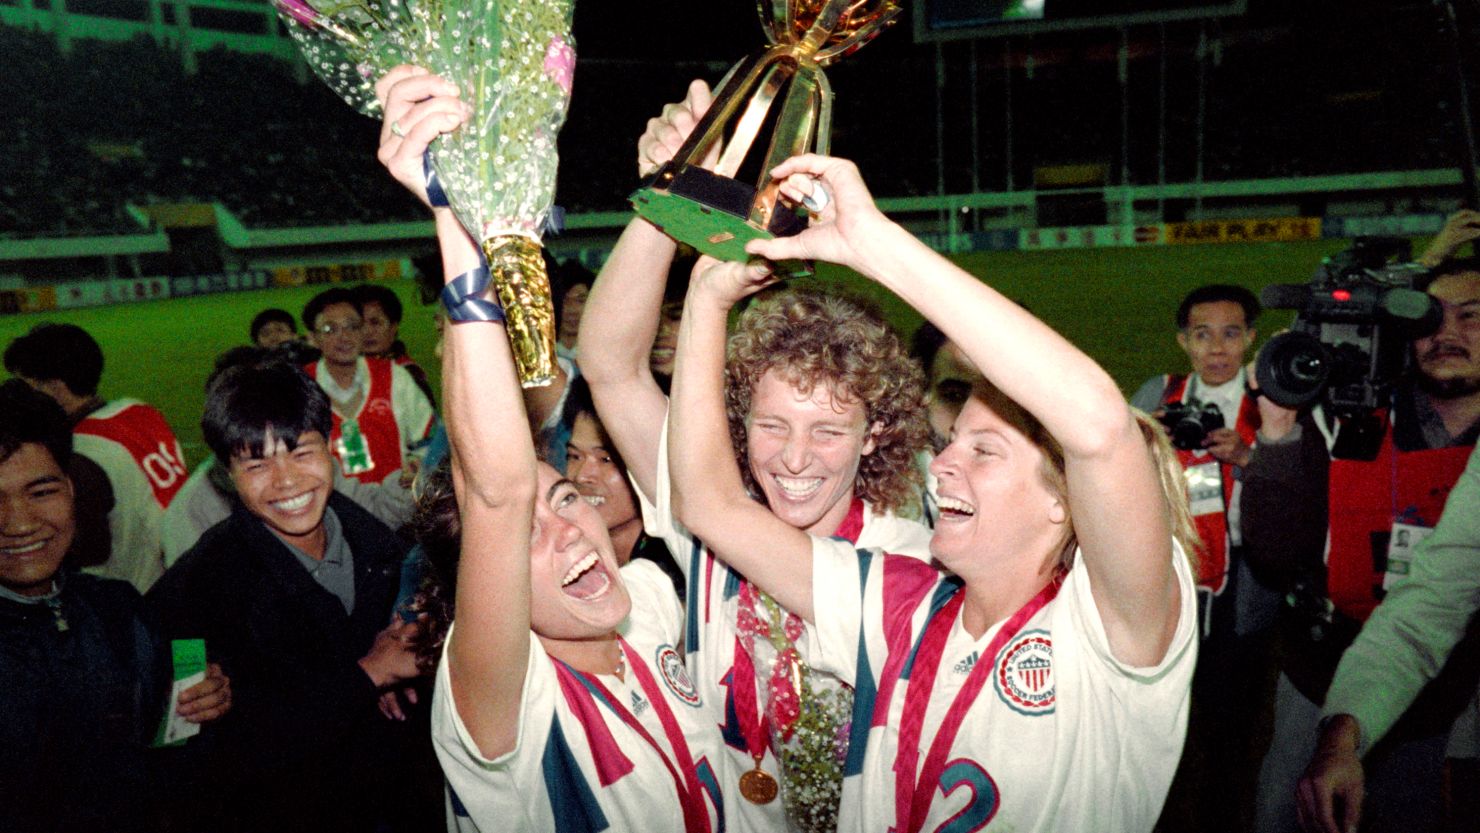 Michelle Akers-Stahl (C) who scored two goals for the US to win the first FIFA World Championship for Women's Football on November 30, 1991, holds the trophy together with teammates Julie Foudy (L) and Carin Jennings (R). The US won the championship by beating Norway 2-1. The FIFA Women's World Cup is recognized as the most important International competition in women's football and is played amongst women's national football teams of the member states of FIFA. Contested every four years, the first Women's World Cup tournament, named the Women's World Championship, was held in 1991, sixty-one years after the men's first FIFA World Cup tournament in 1930AFP PHOTO TOMMY CHENG (Photo credit should read TOMMY CHENG/AFP via Getty Images)